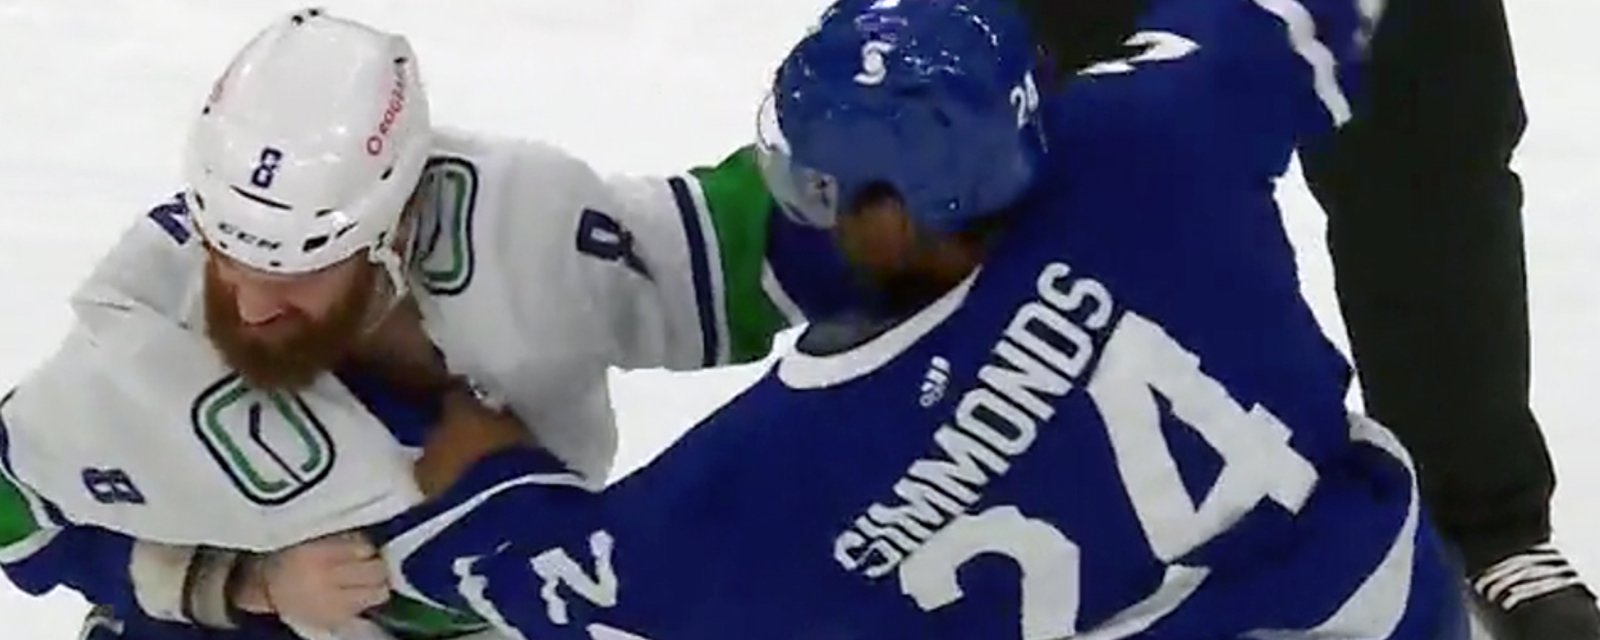 Simmonds lights up Benn with some heavy right hands in very one sided scrap